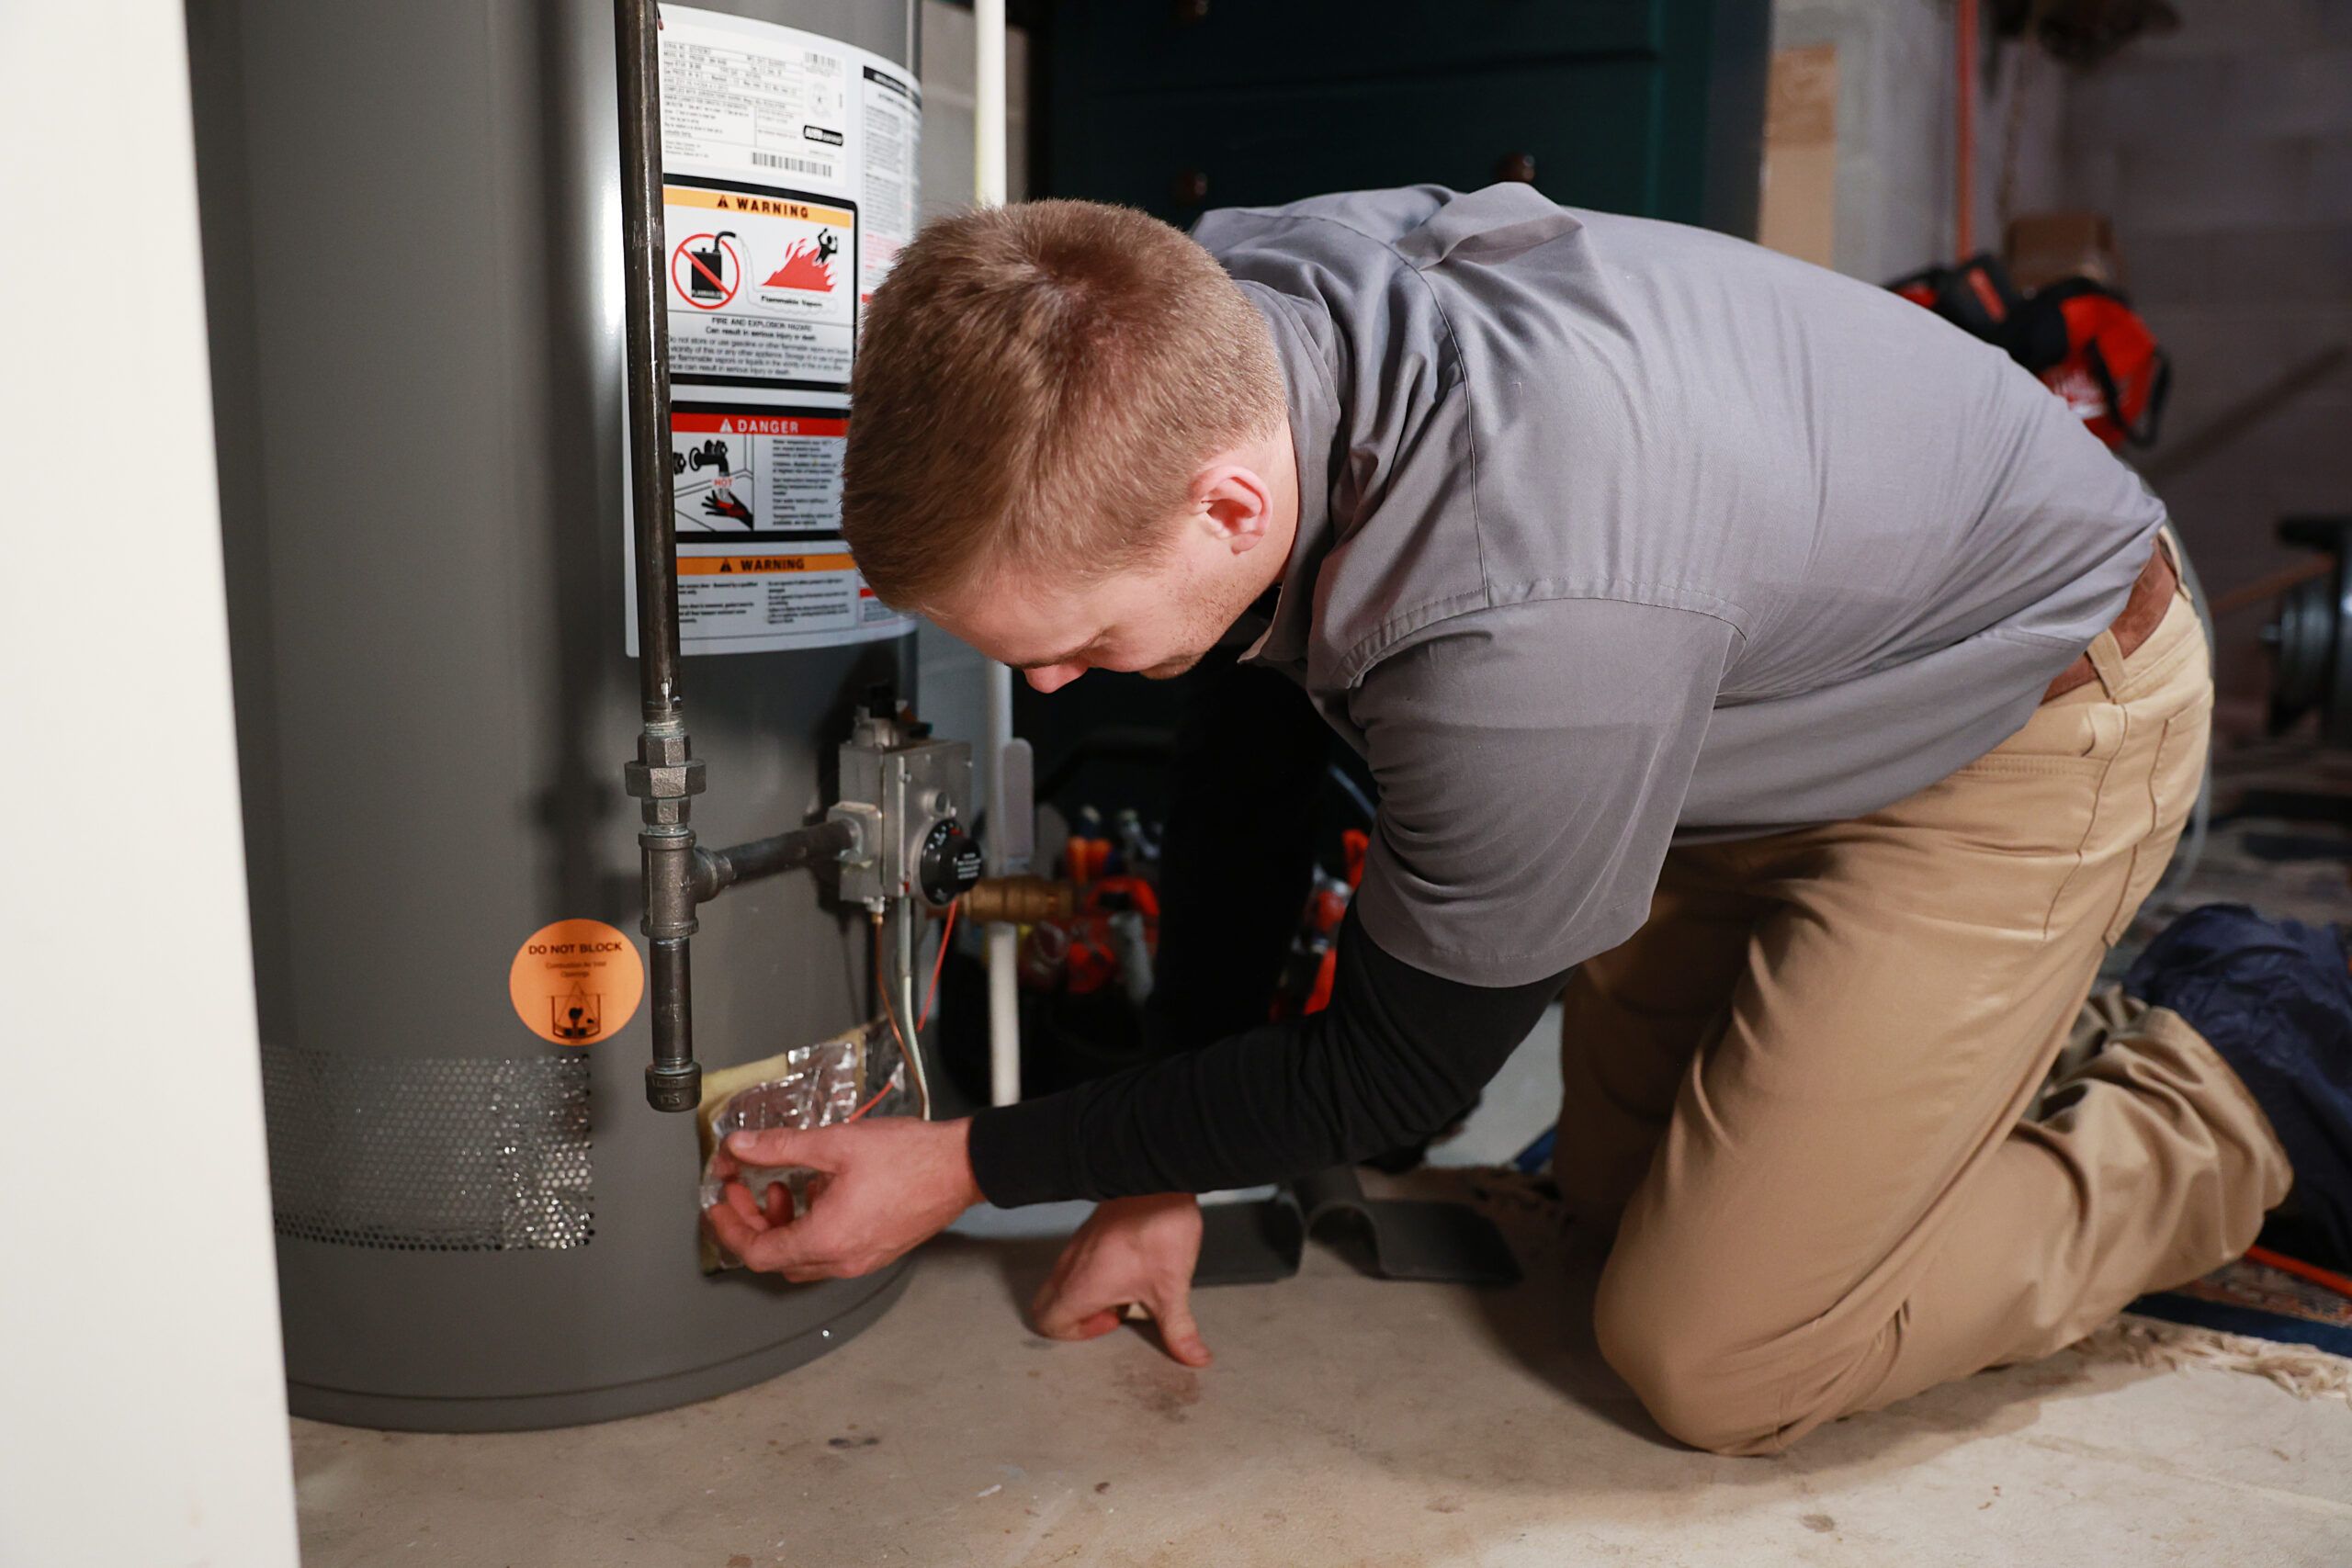 Plumber from Austin Plumbing, Heating & Air making a repair on a water heater